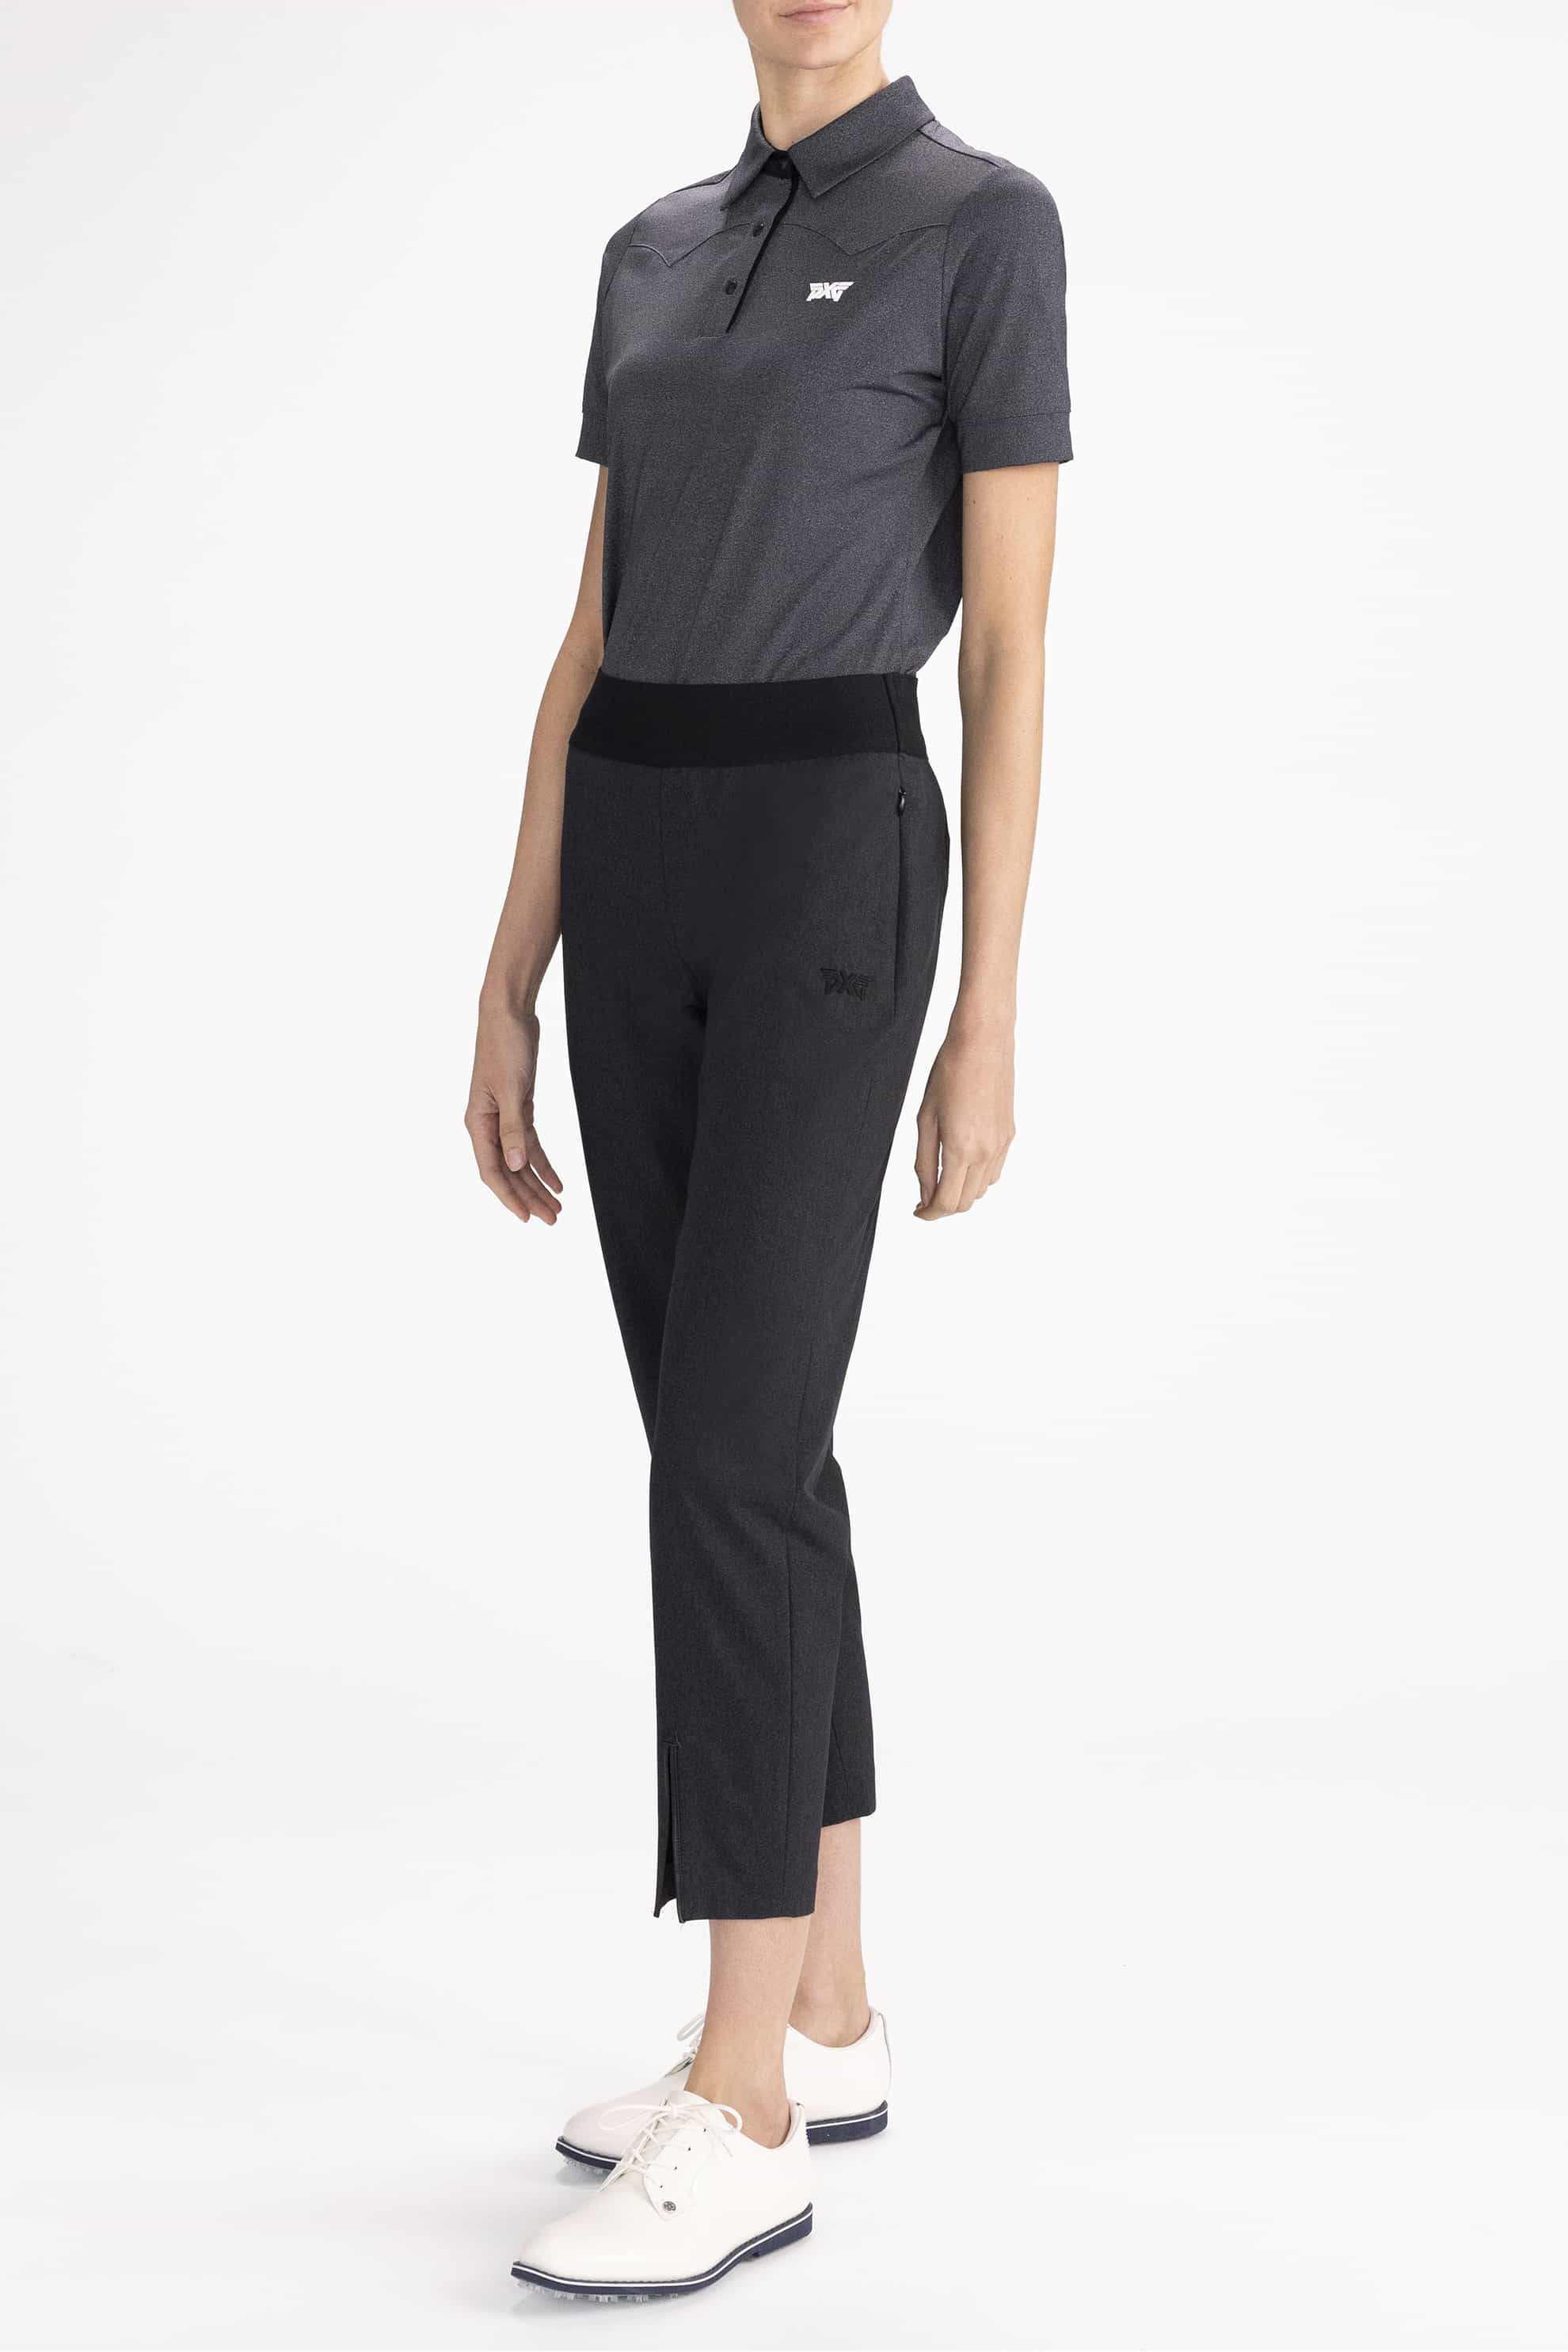 Mango jersey pants with front slit in black | ASOS